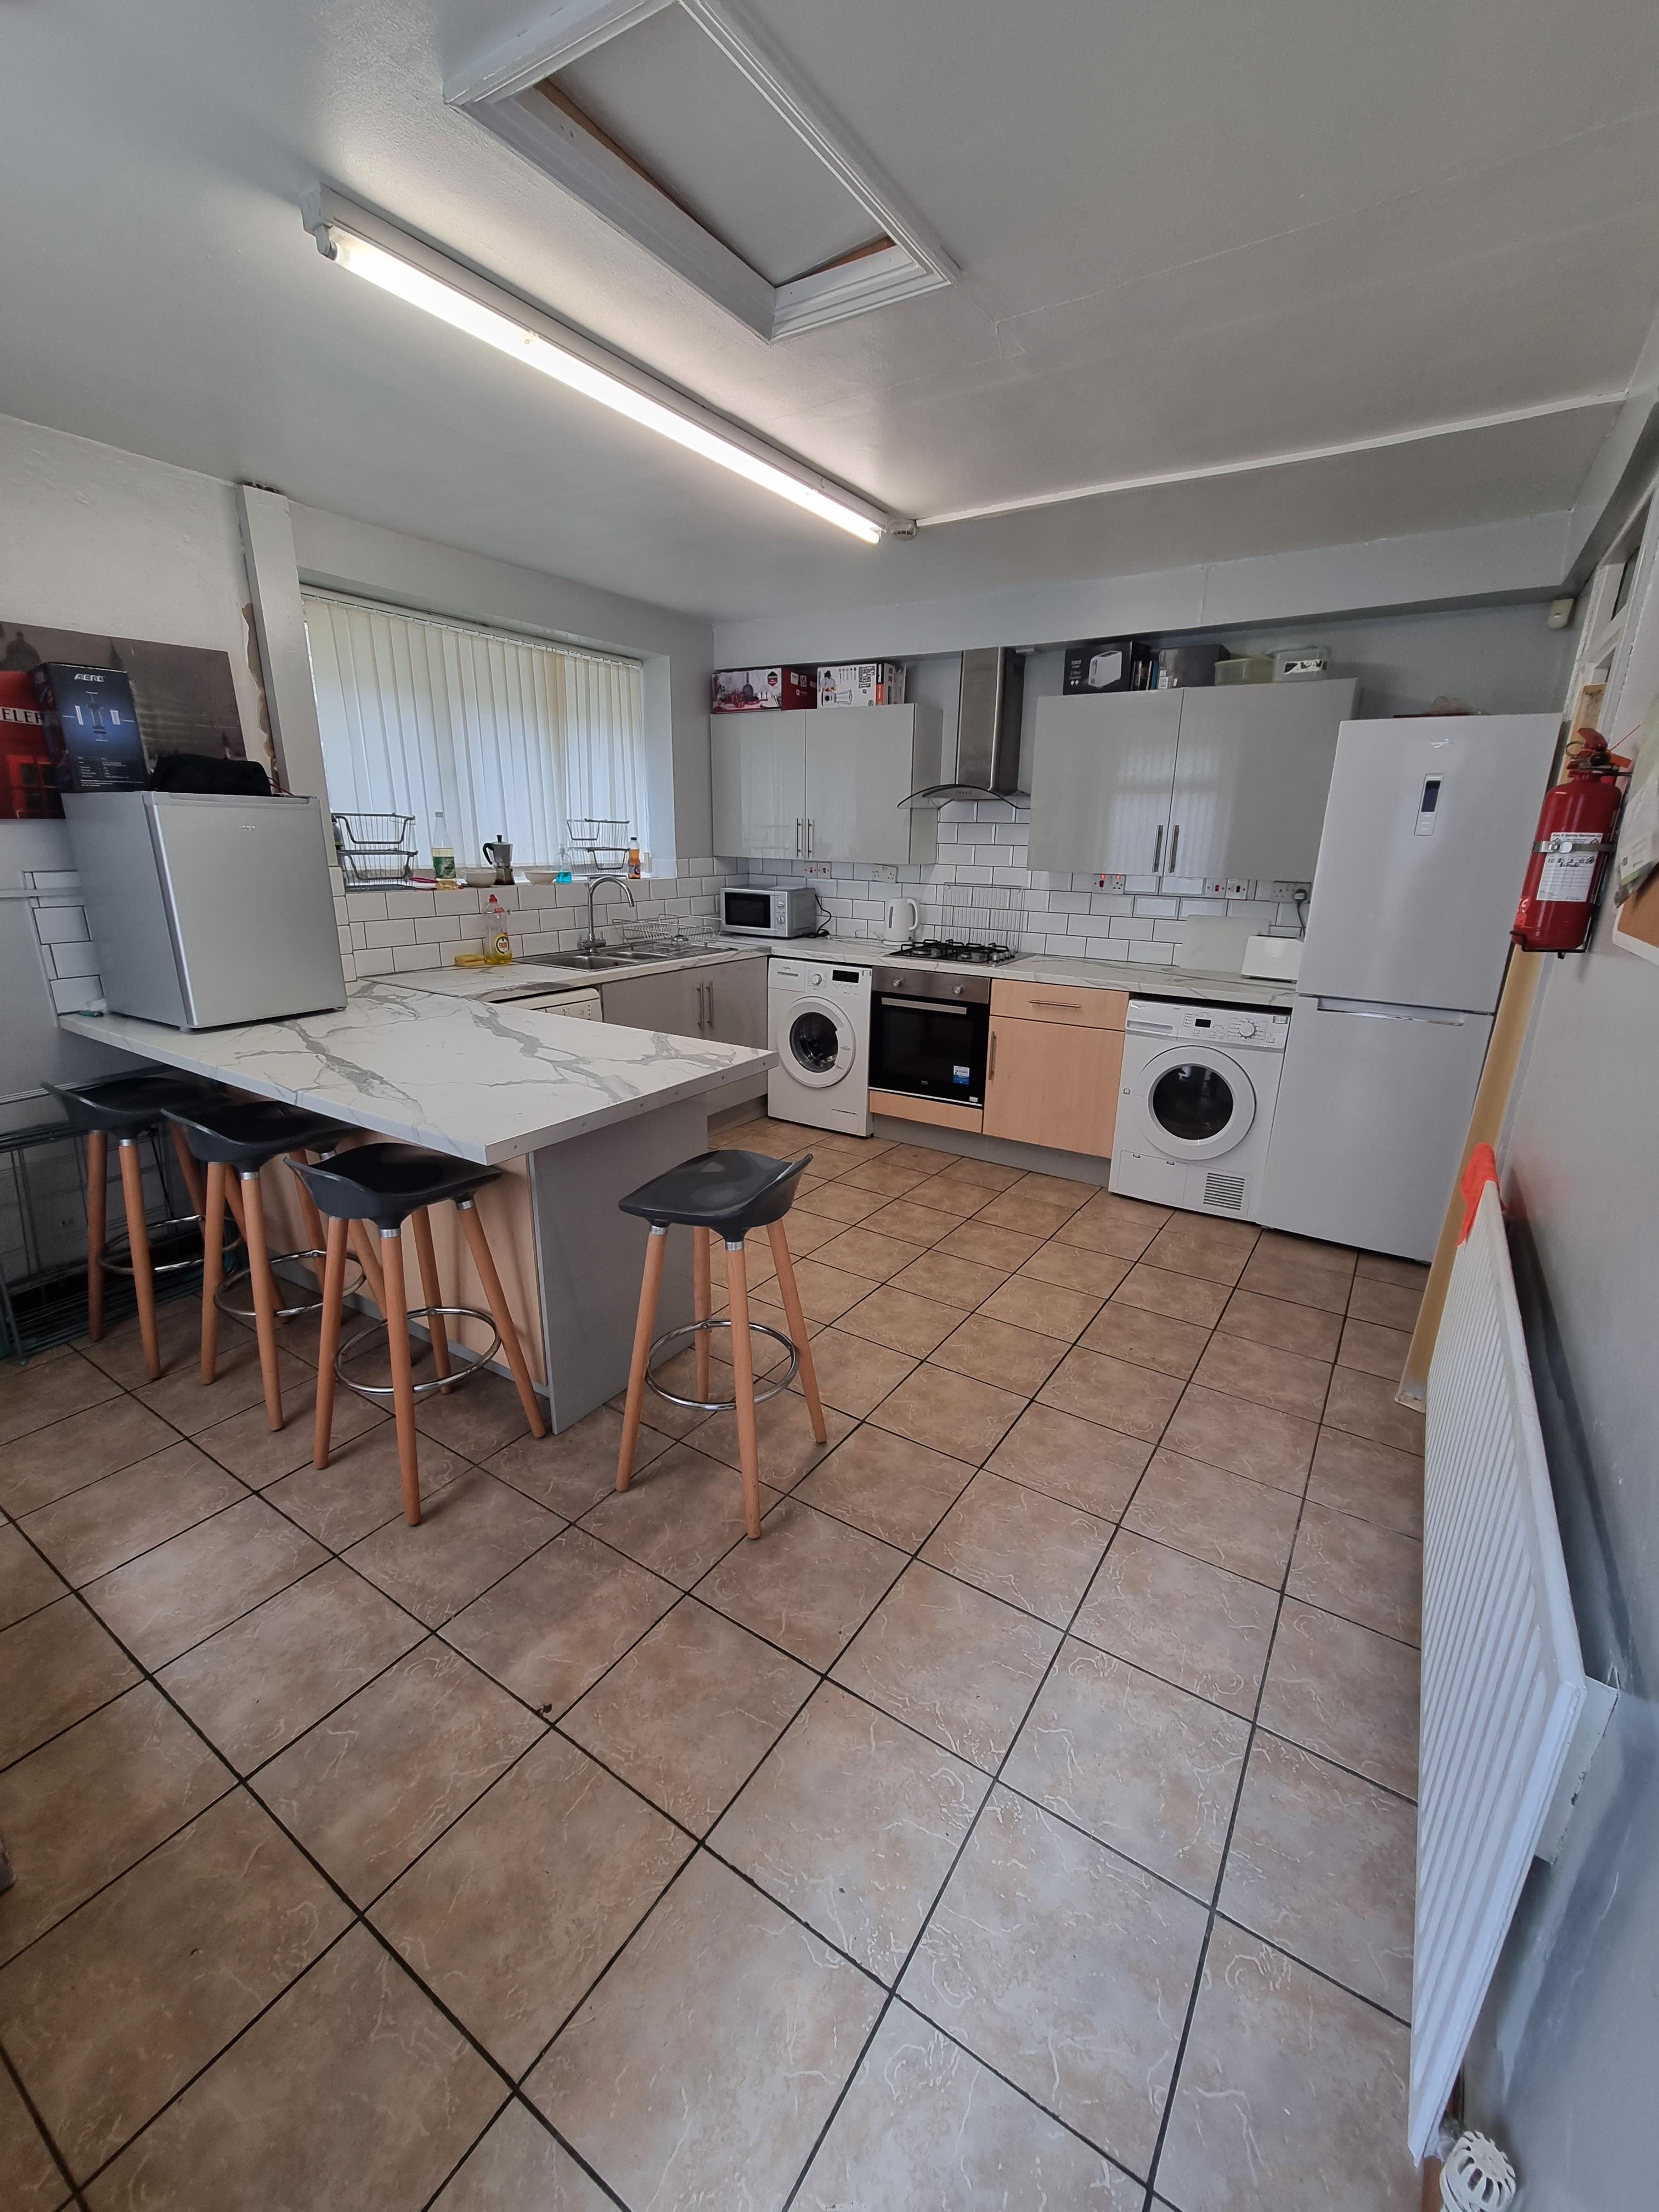 1 bed house / flat share to rent in Wood Road, Treforest  - Property Image 1